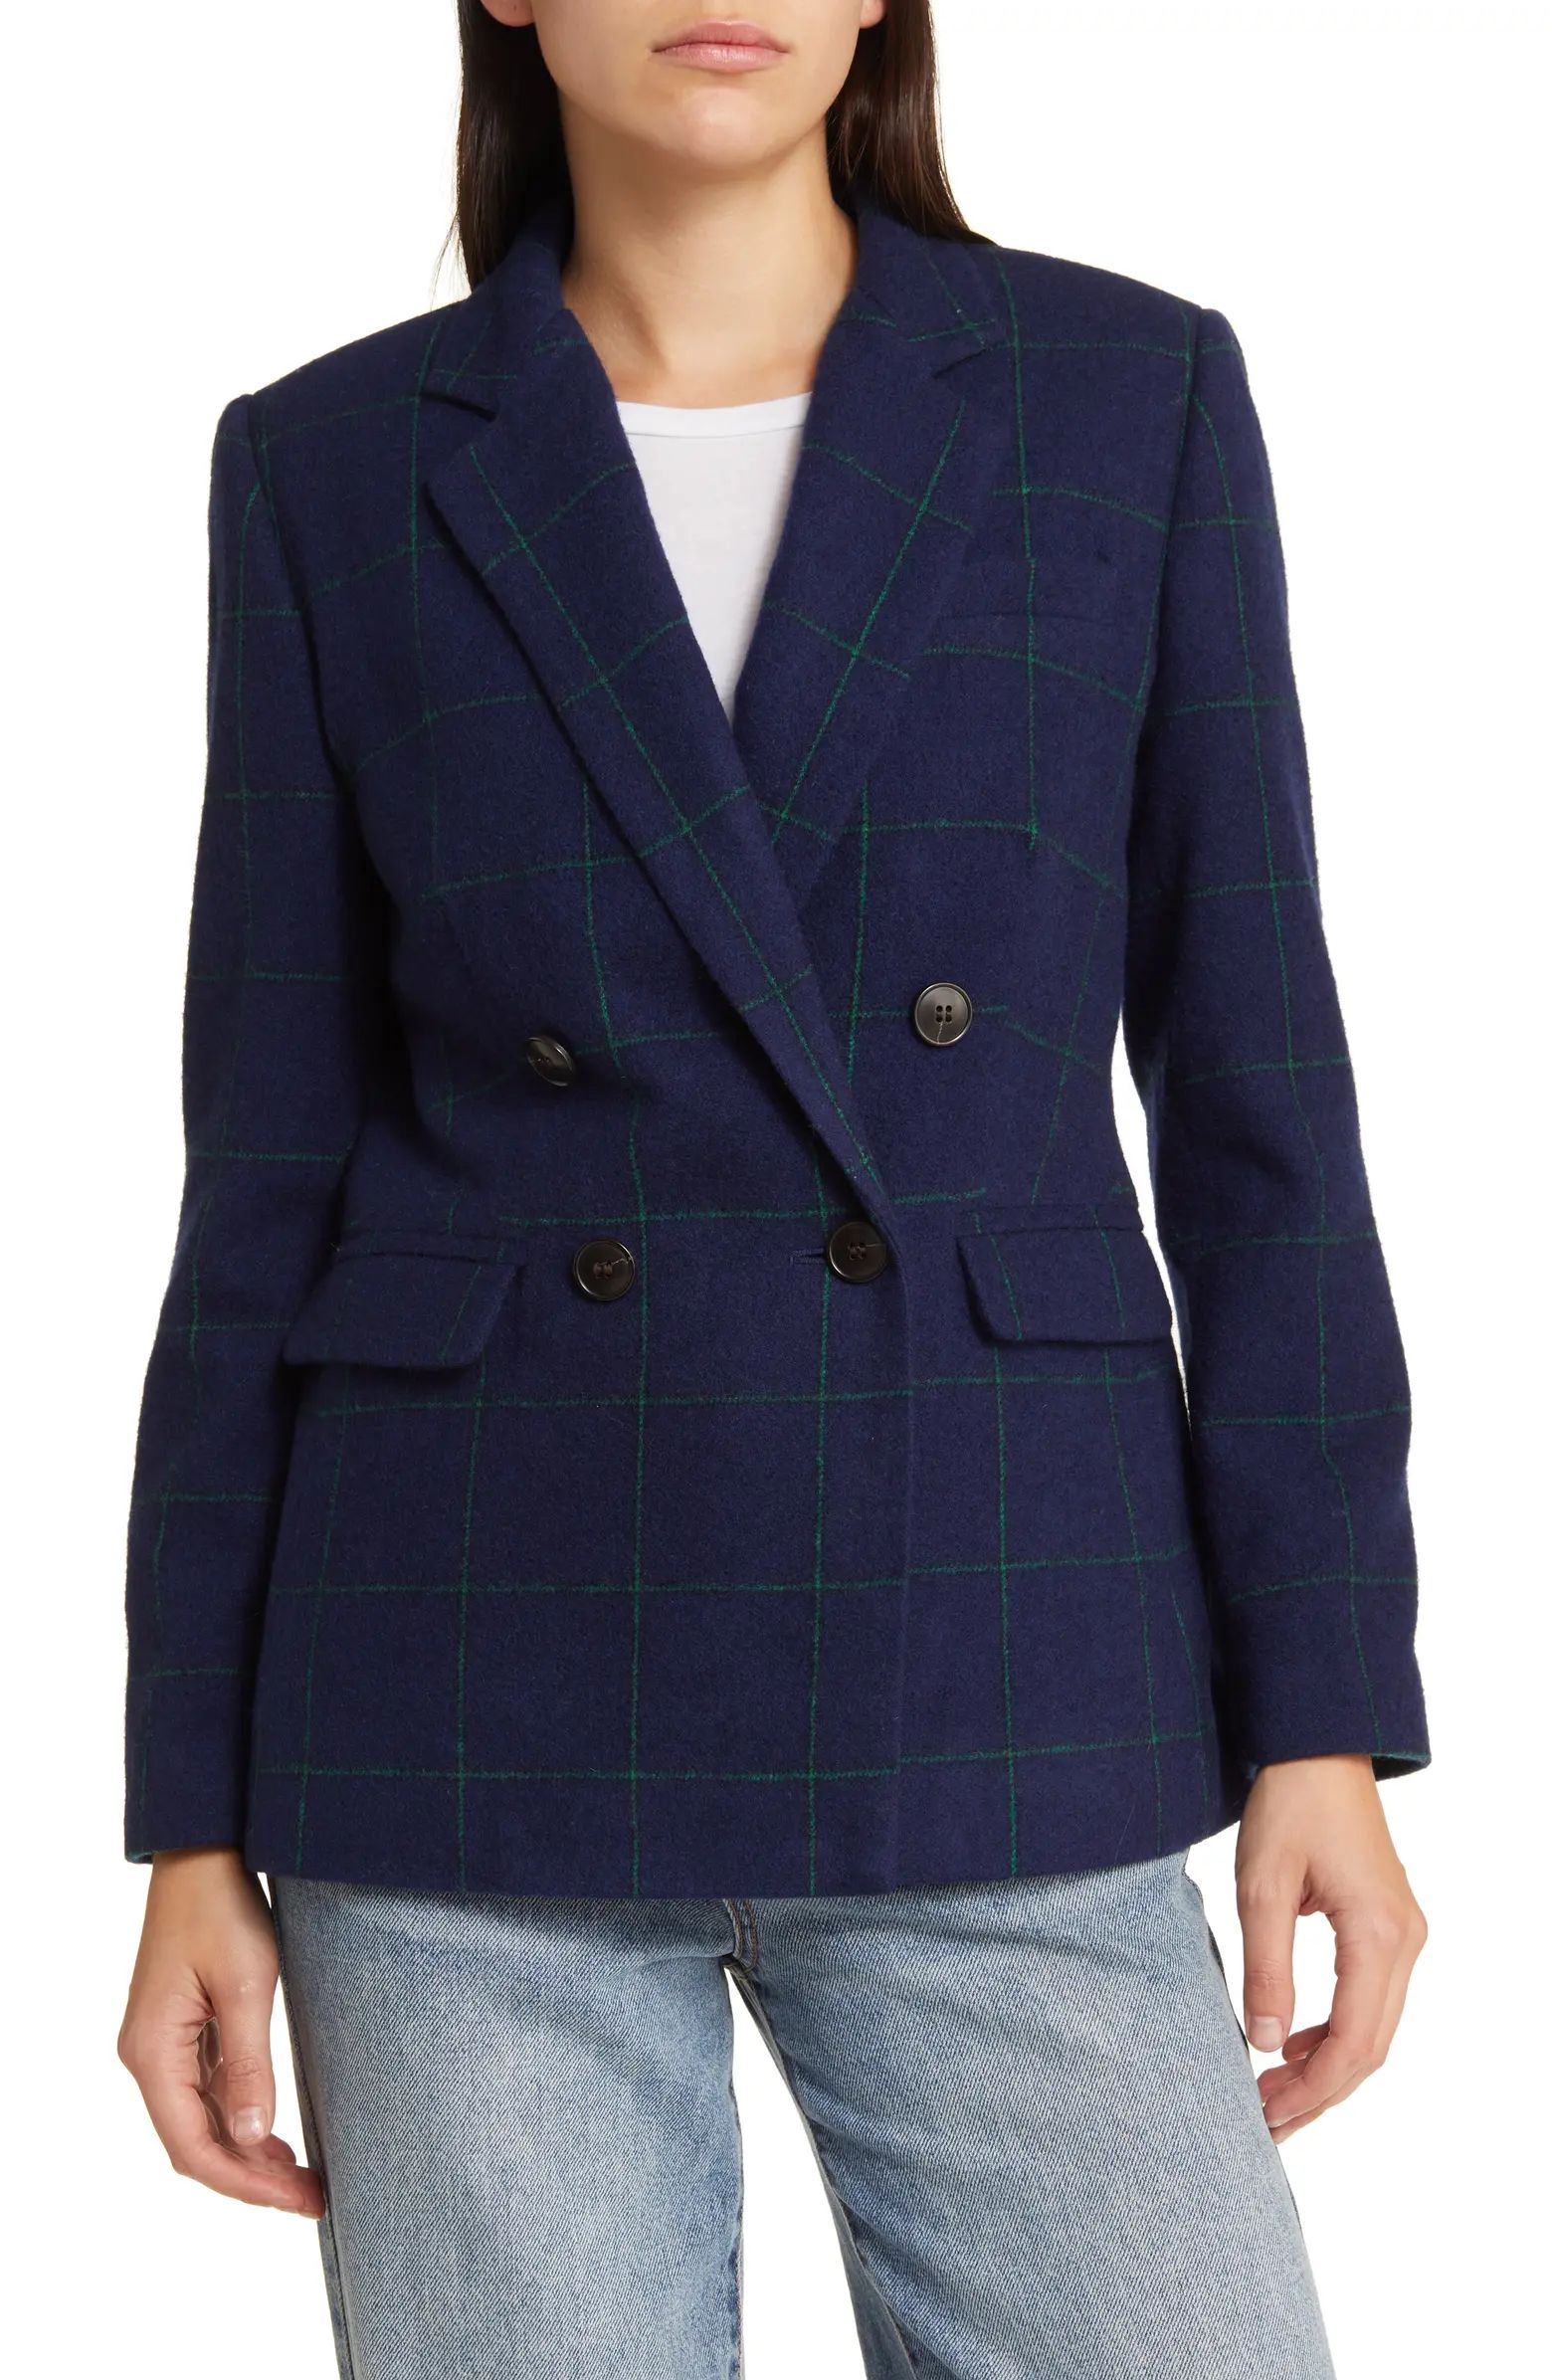 Madewell Caldwell Double Breasted Wool Blend Blazer | Nordstrom | Nordstrom